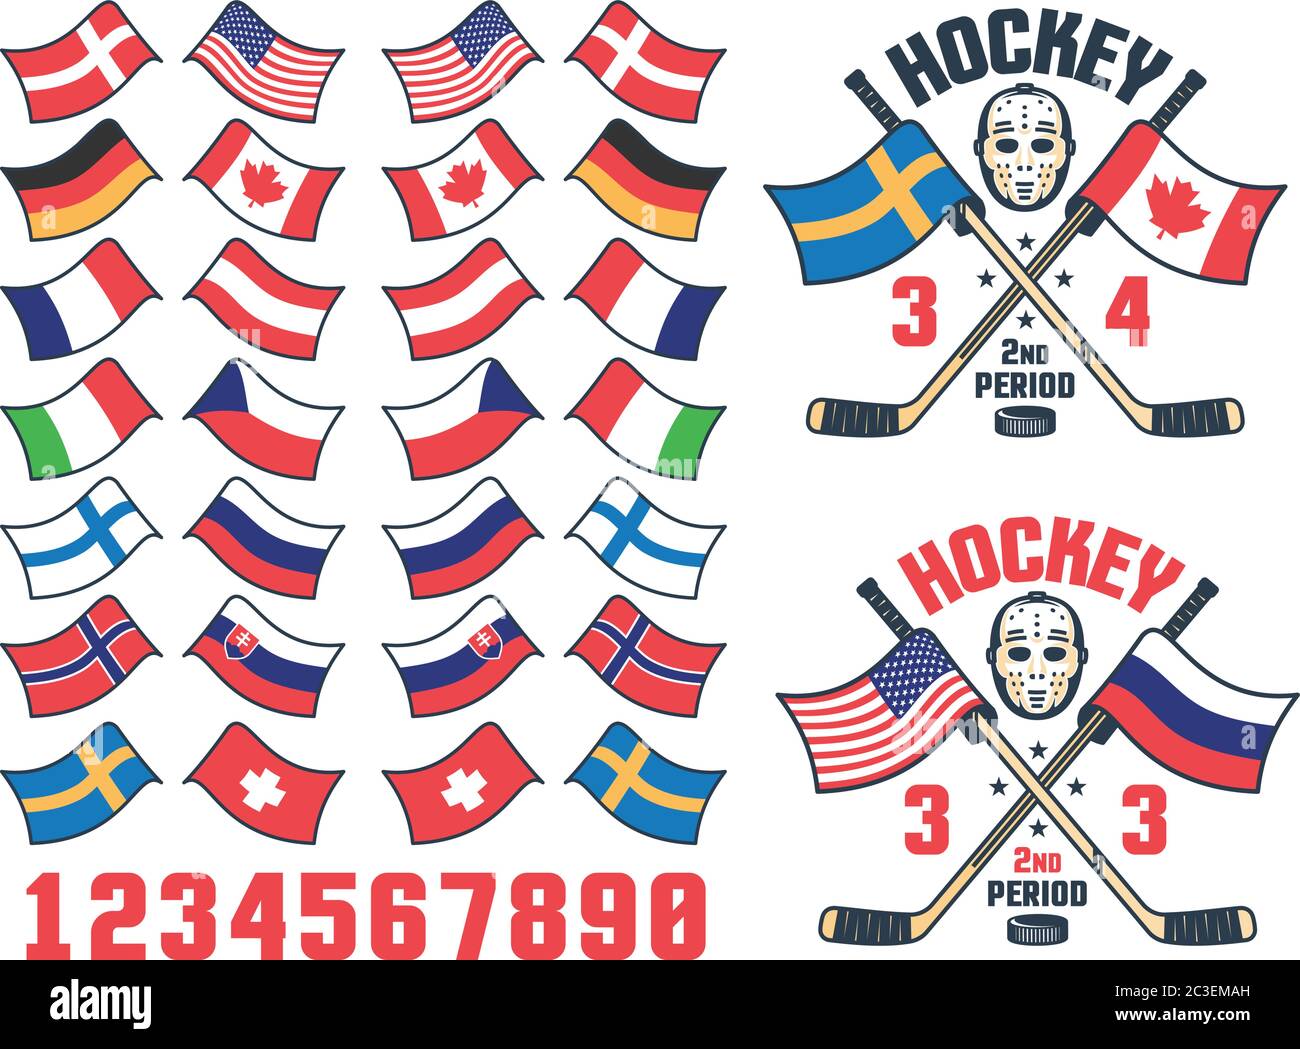 Hockey match score logo with national flag Stock Vector